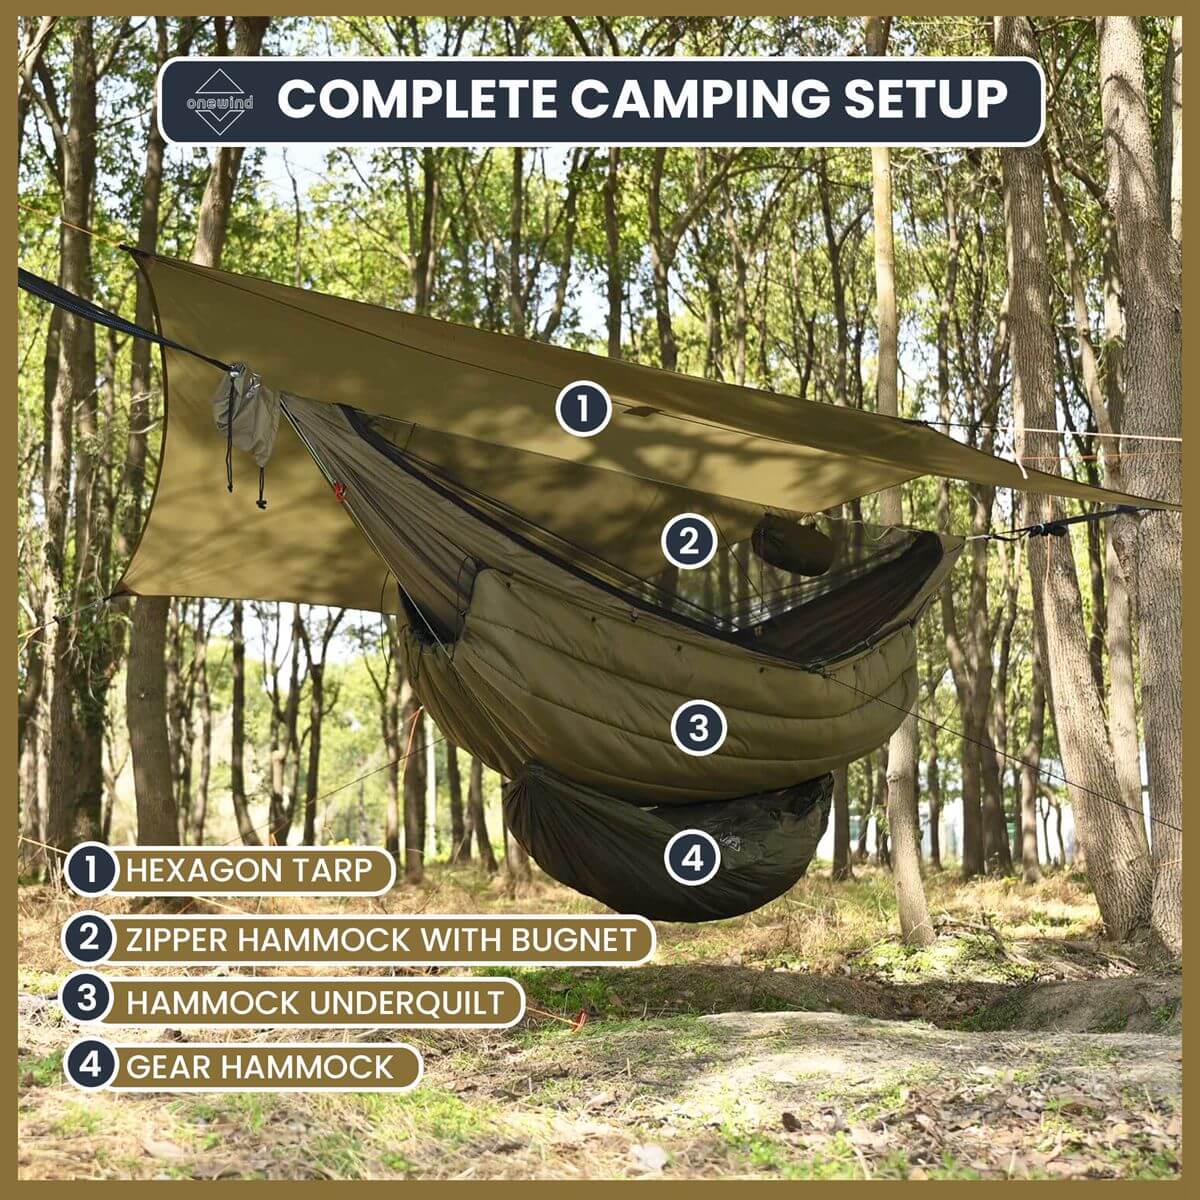 Complete Camping Set-up | Onewind Outdoors